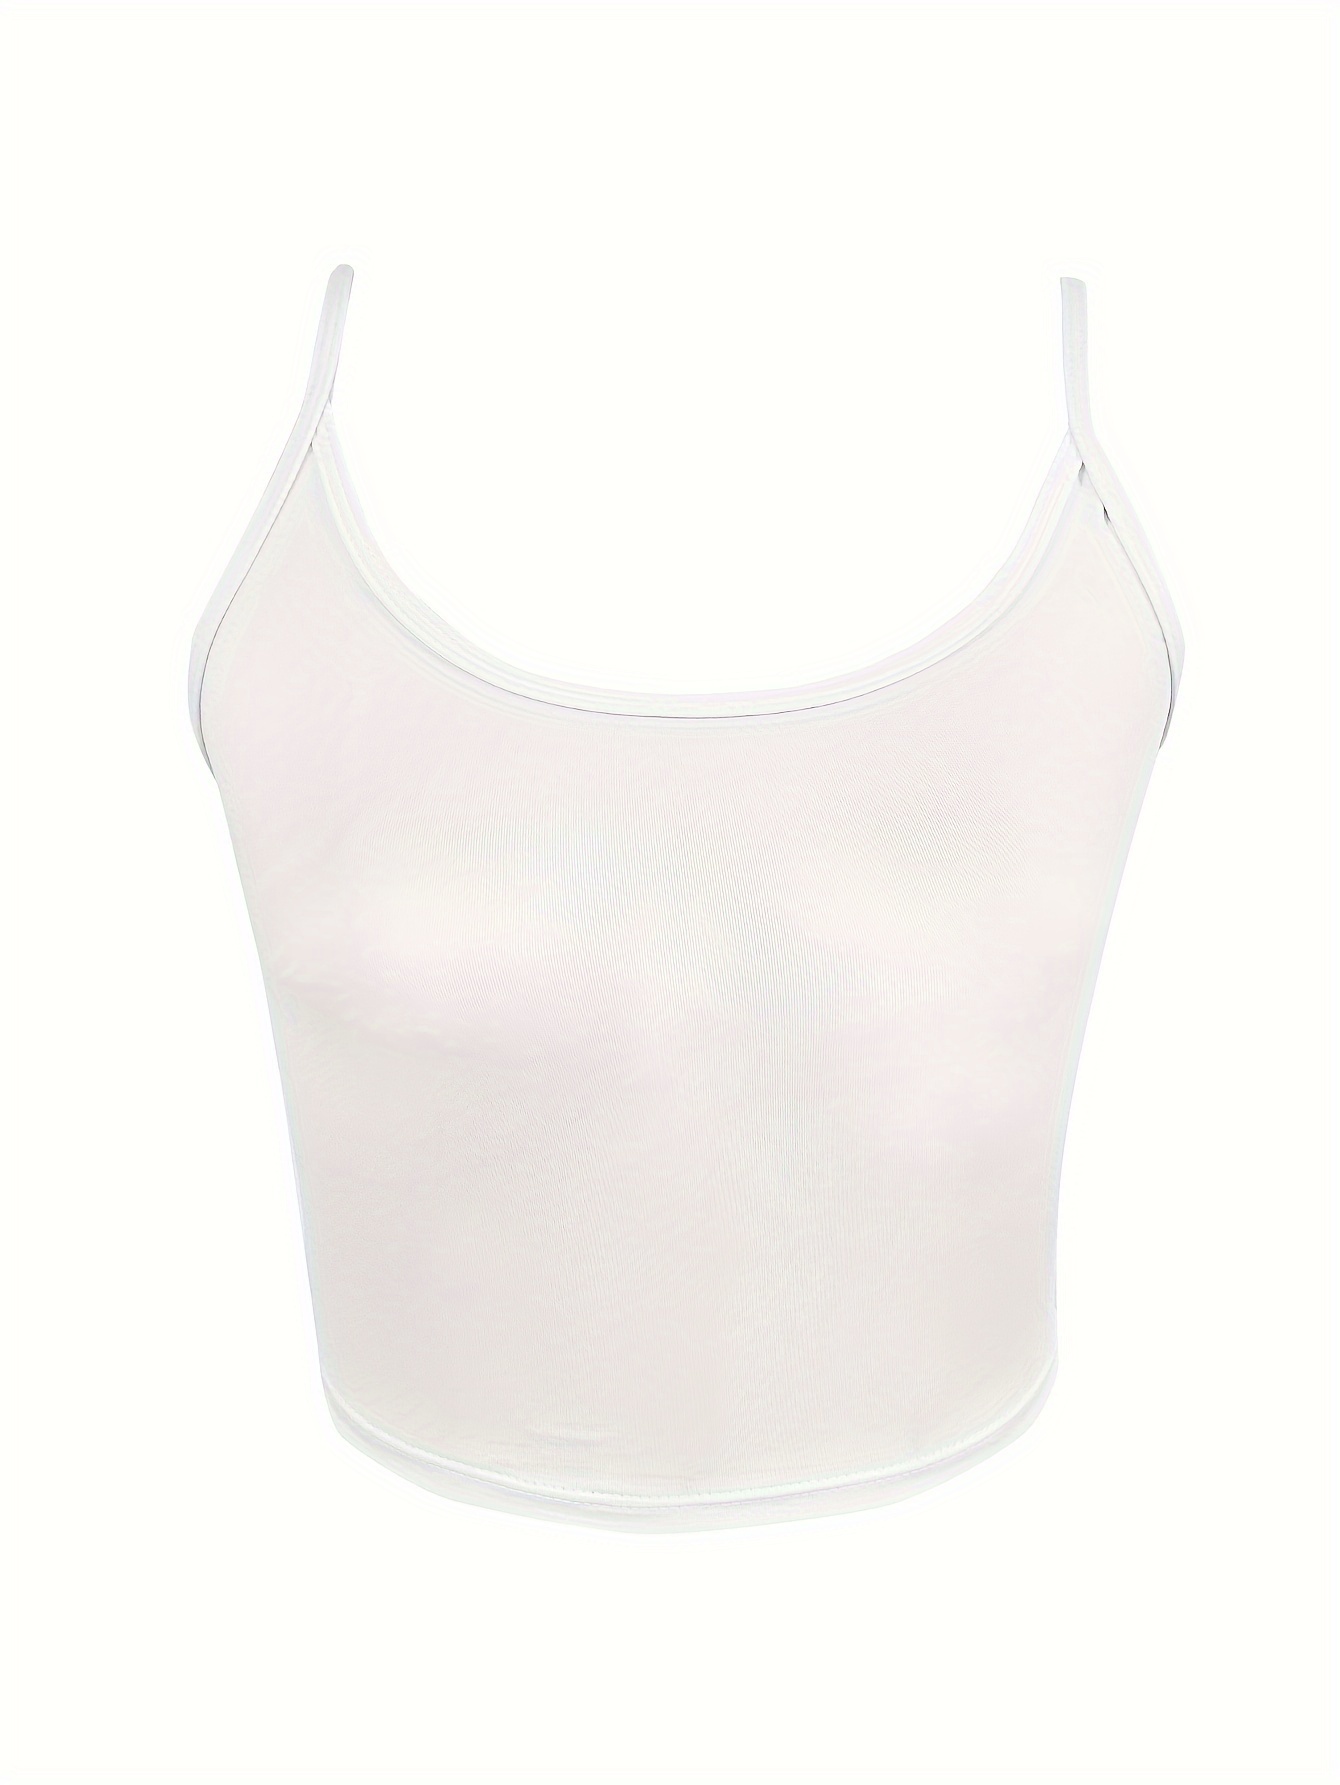 Women Cropped Cami Tank Tops Criss Cross Strappy Front Cut Out Sport  Camisoles Summer Sleeveless Spaghetti Strap Shirts